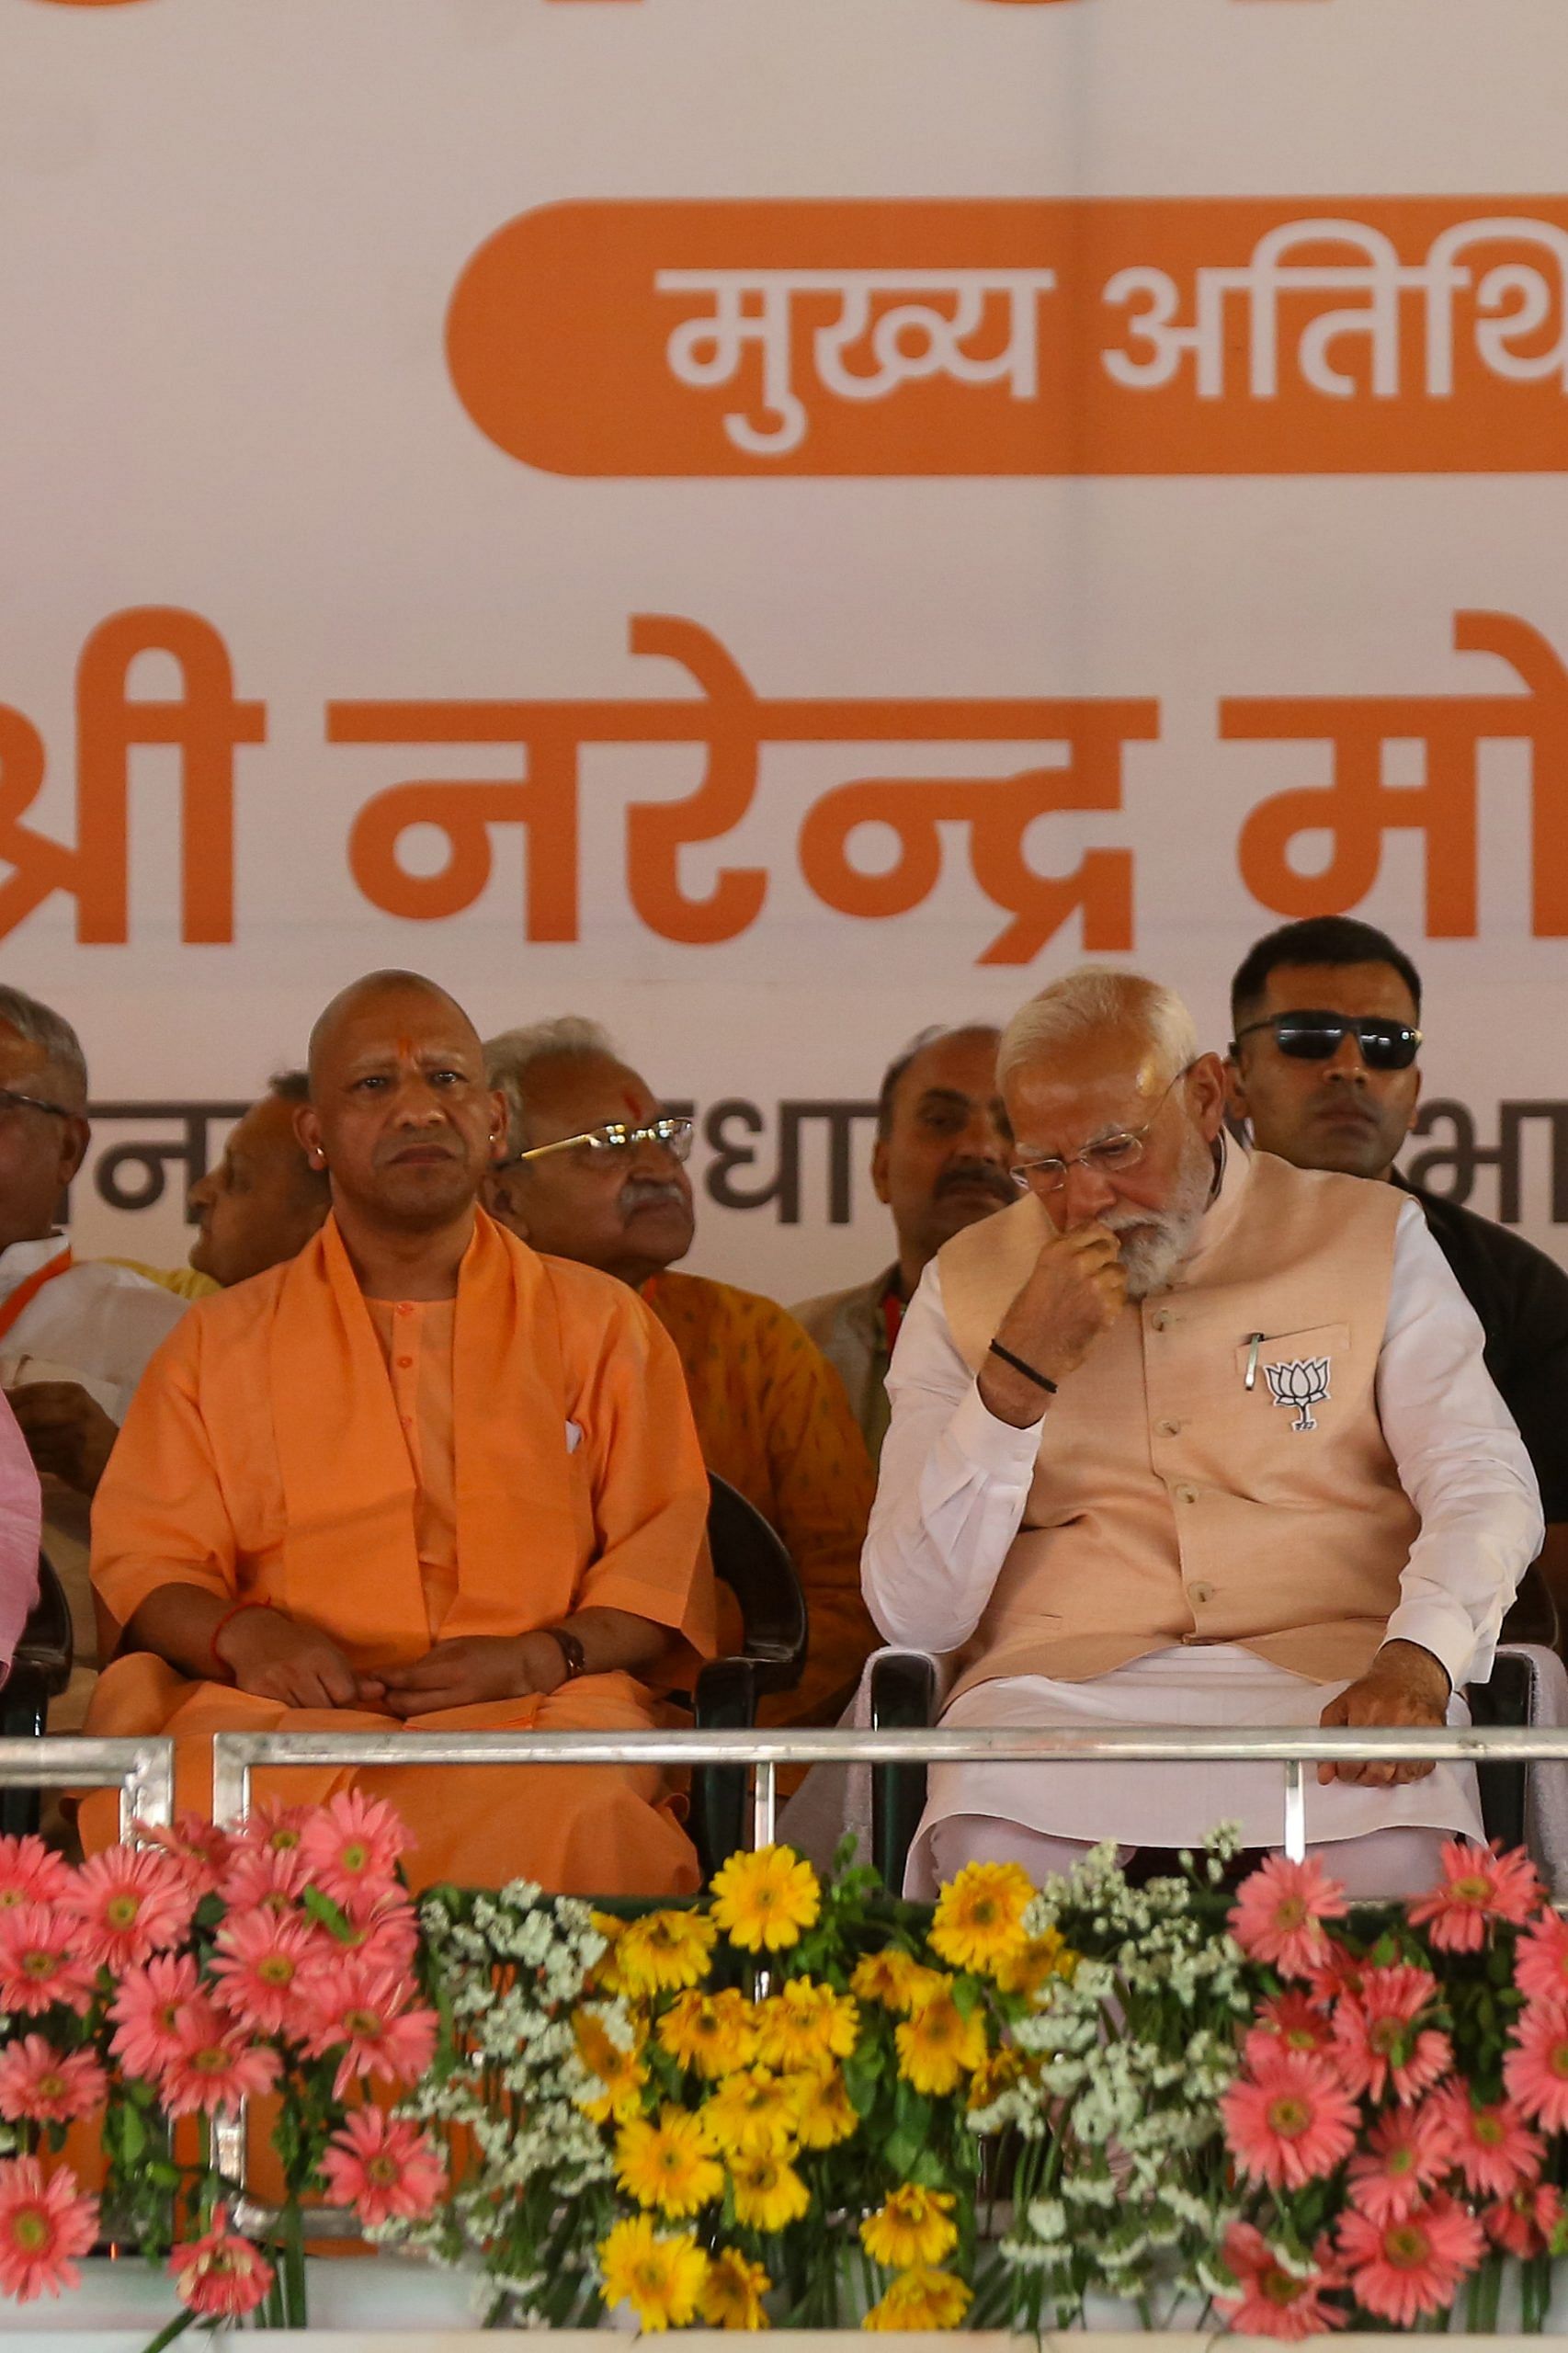 Prime Minister Narendra Modi with UP Chief Minister Yogi Adityanath during an election campaign rally ahead of Lok Sabha polls, in Meerut | Photo Suraj Singh Bisht, ThePrint